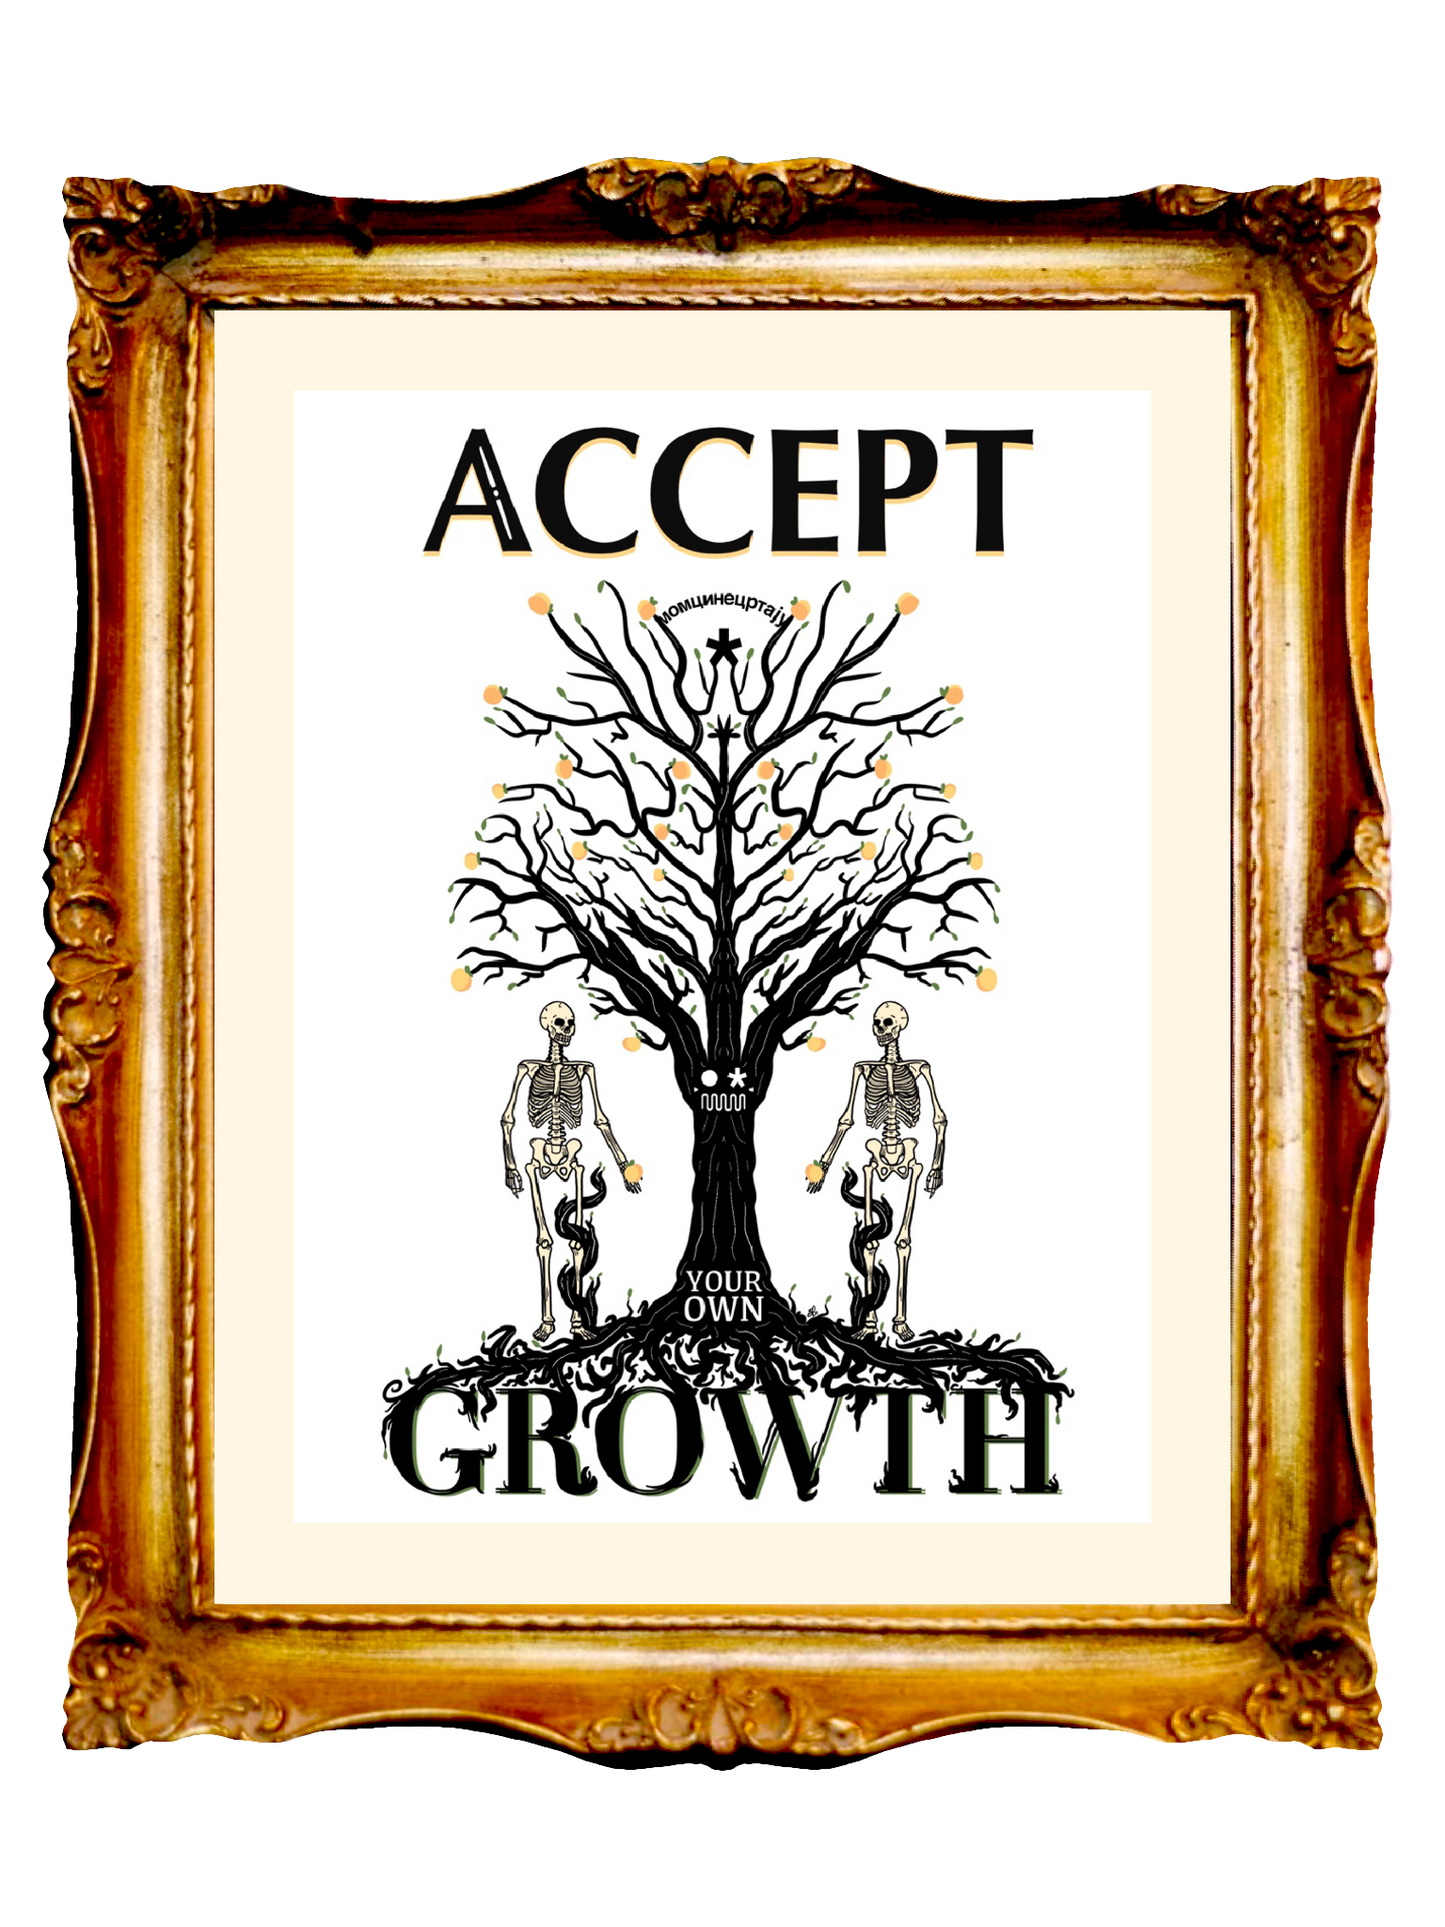 ACCEPT YOUR OWN GROWTH - Limited Poster - BOYSDONTDRAW